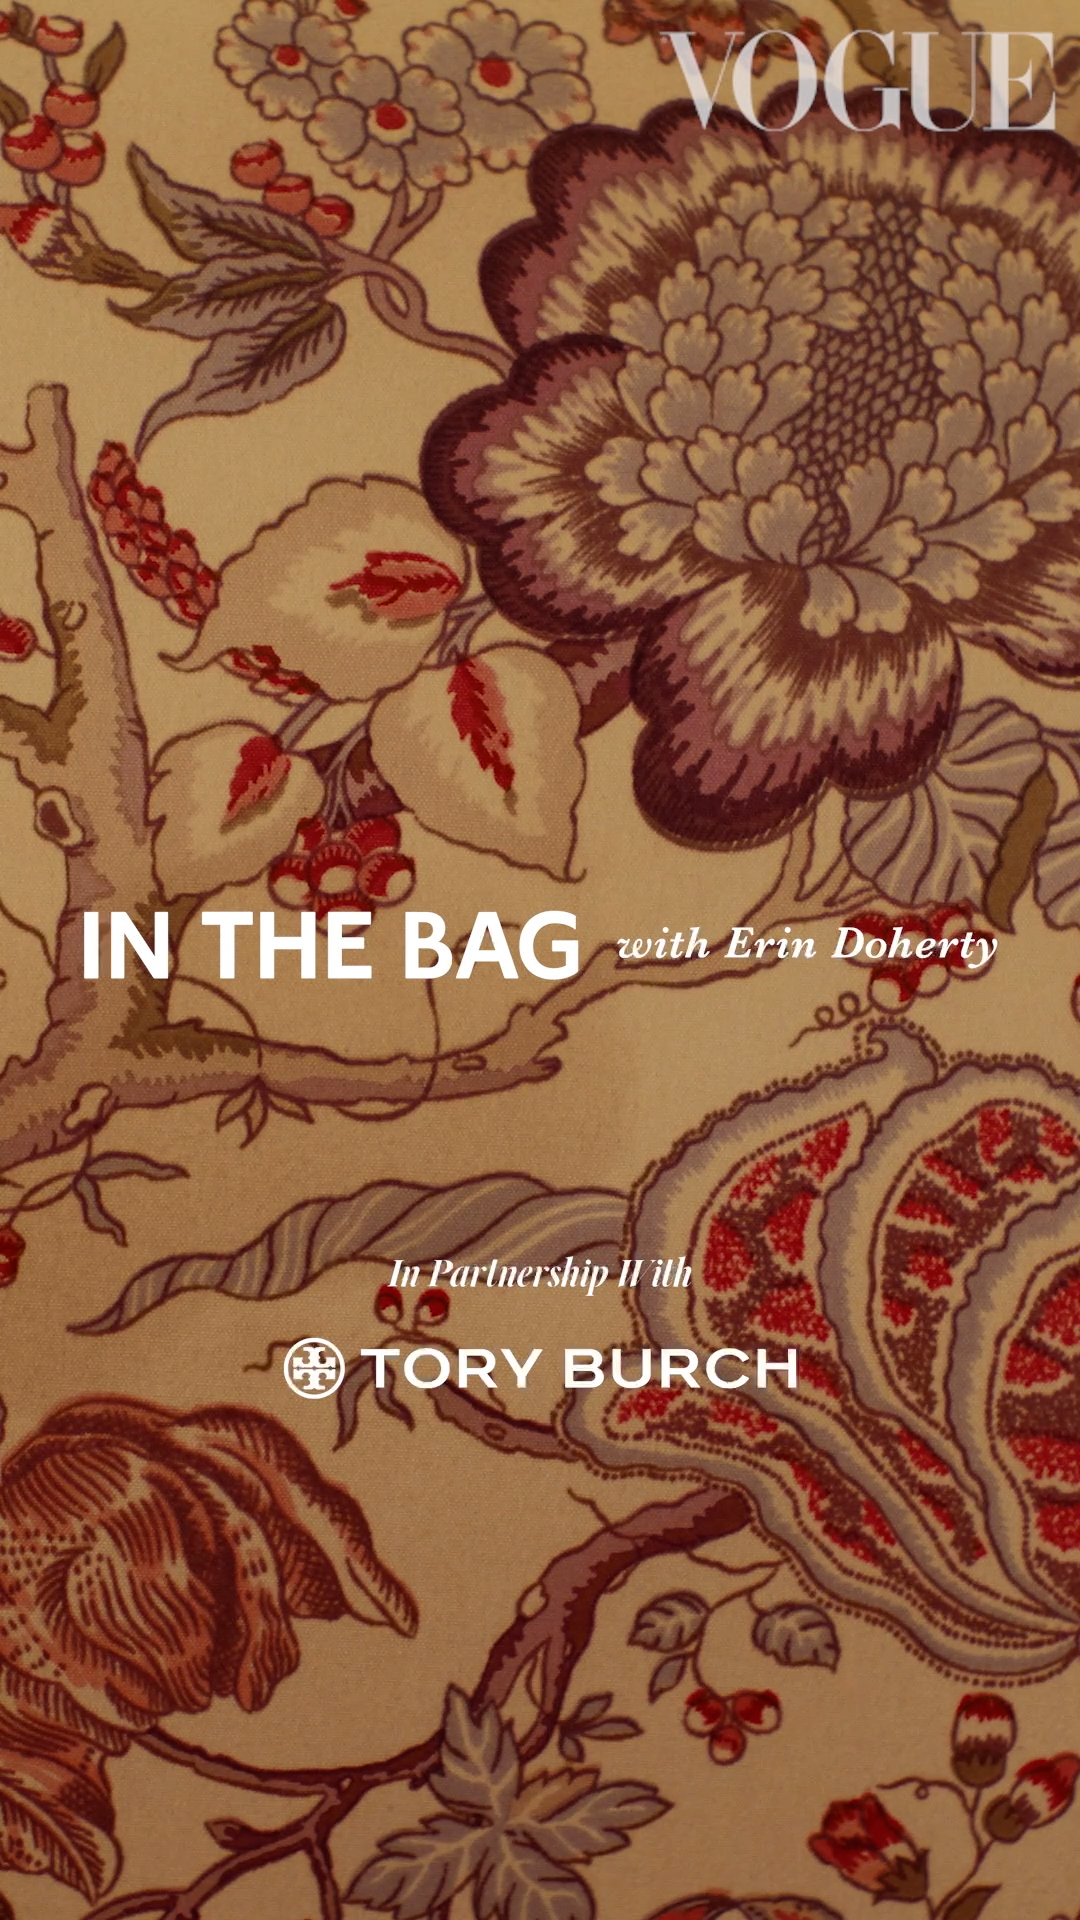 VOGUE x Conde Nast - Tory Burch | Erin Doherty | In the Bag | 9:16 | Master